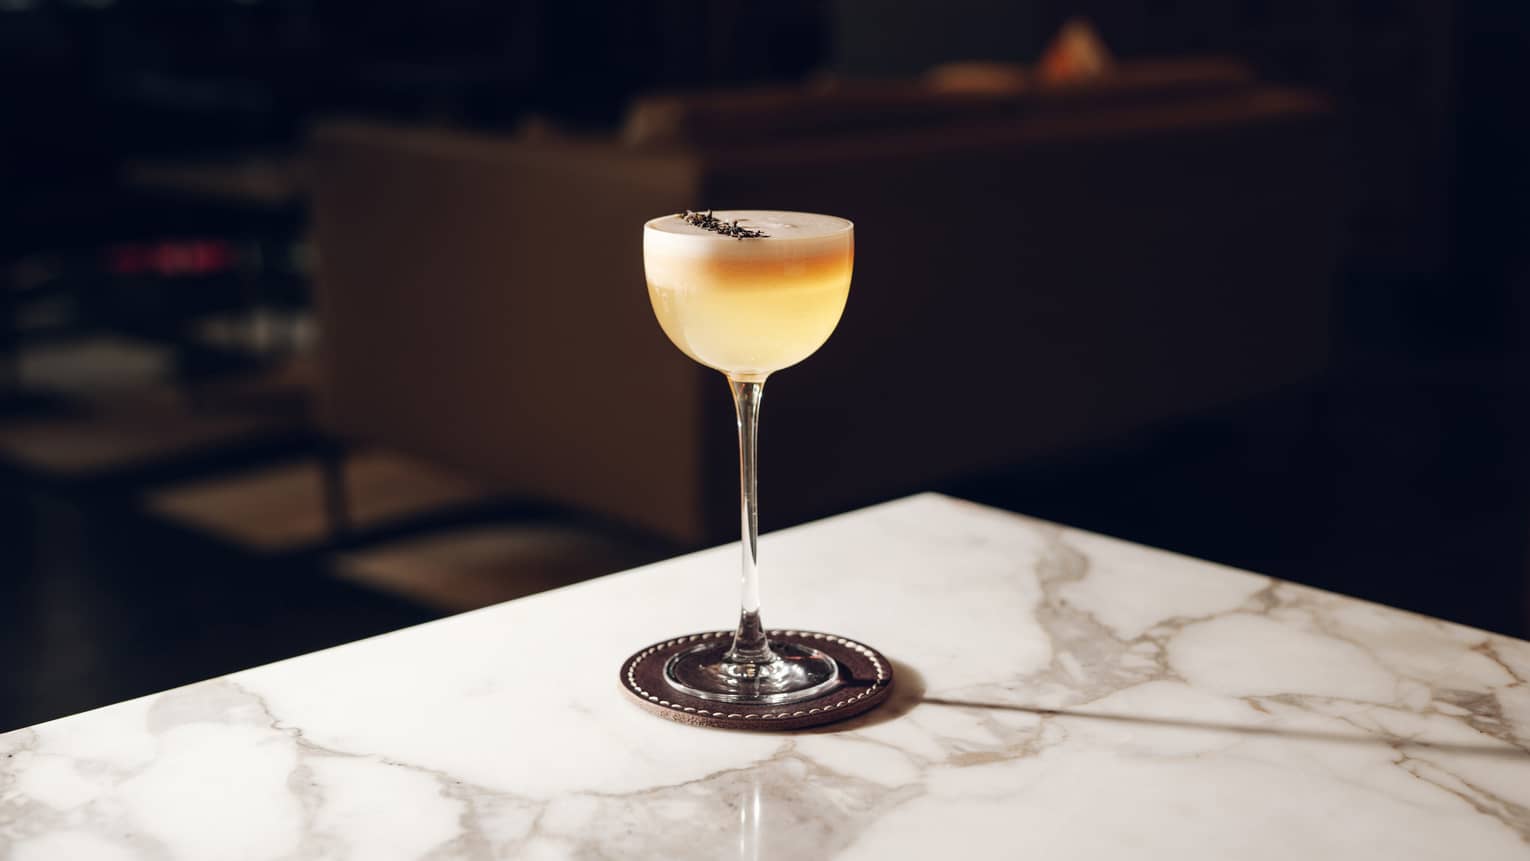 Pale-yellow cocktail topped with foam and garnish in wine glass on marble table